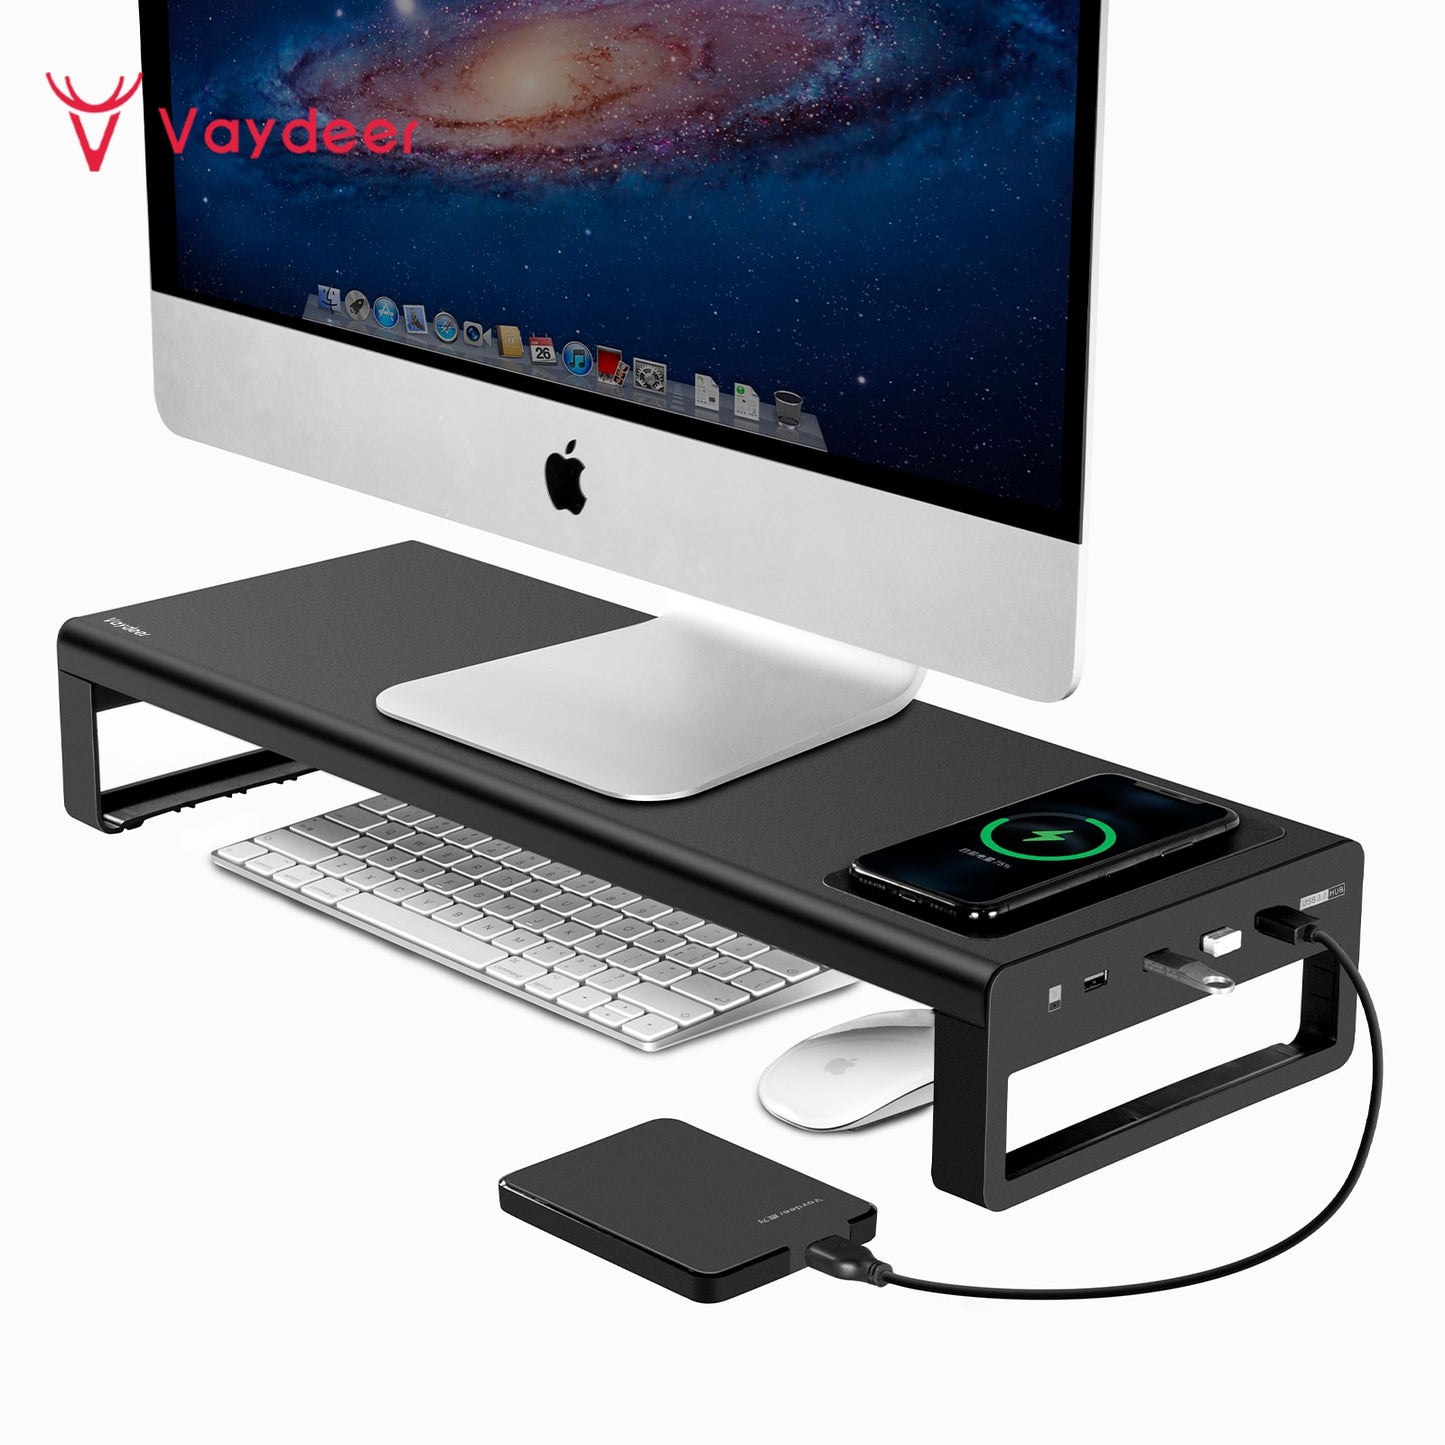 USB3.0 Wireless Charging Aluminum Monitor Stand Riser Support Transfer Data and Charging,Keyboard and Mouse Storage Desk